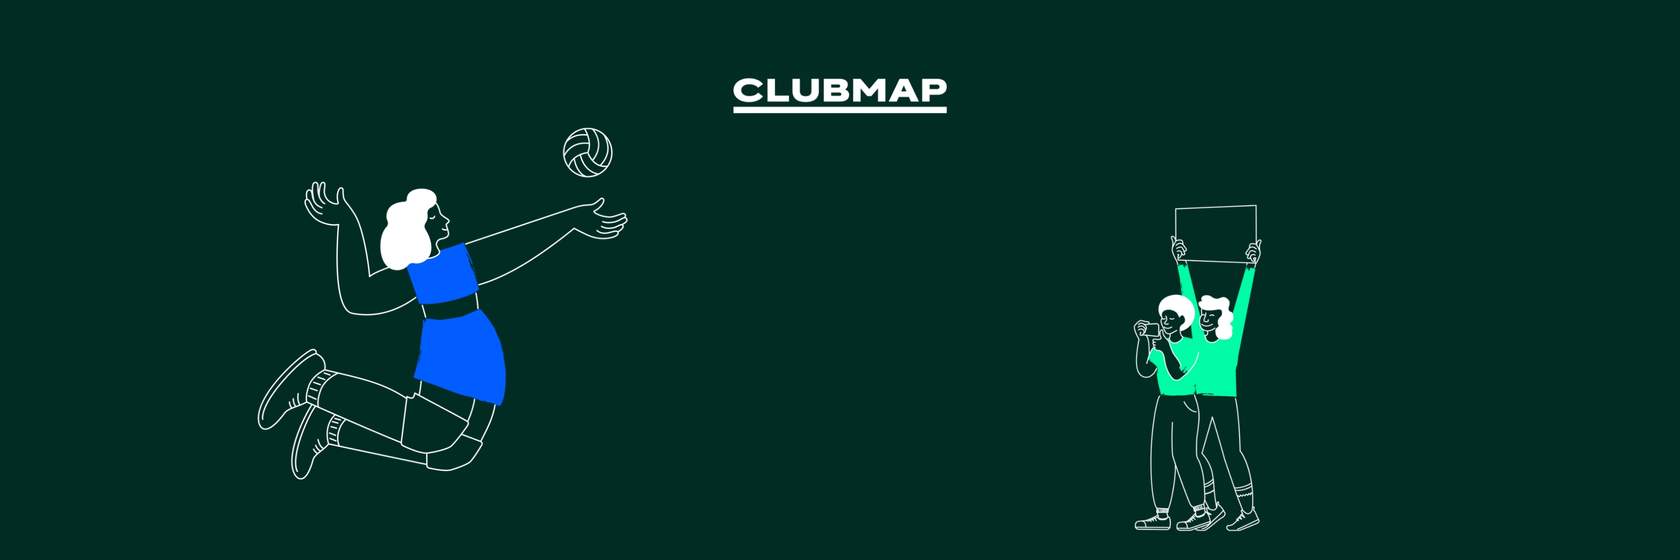 CLUBMAP-COMMITTEE STRUCTURE